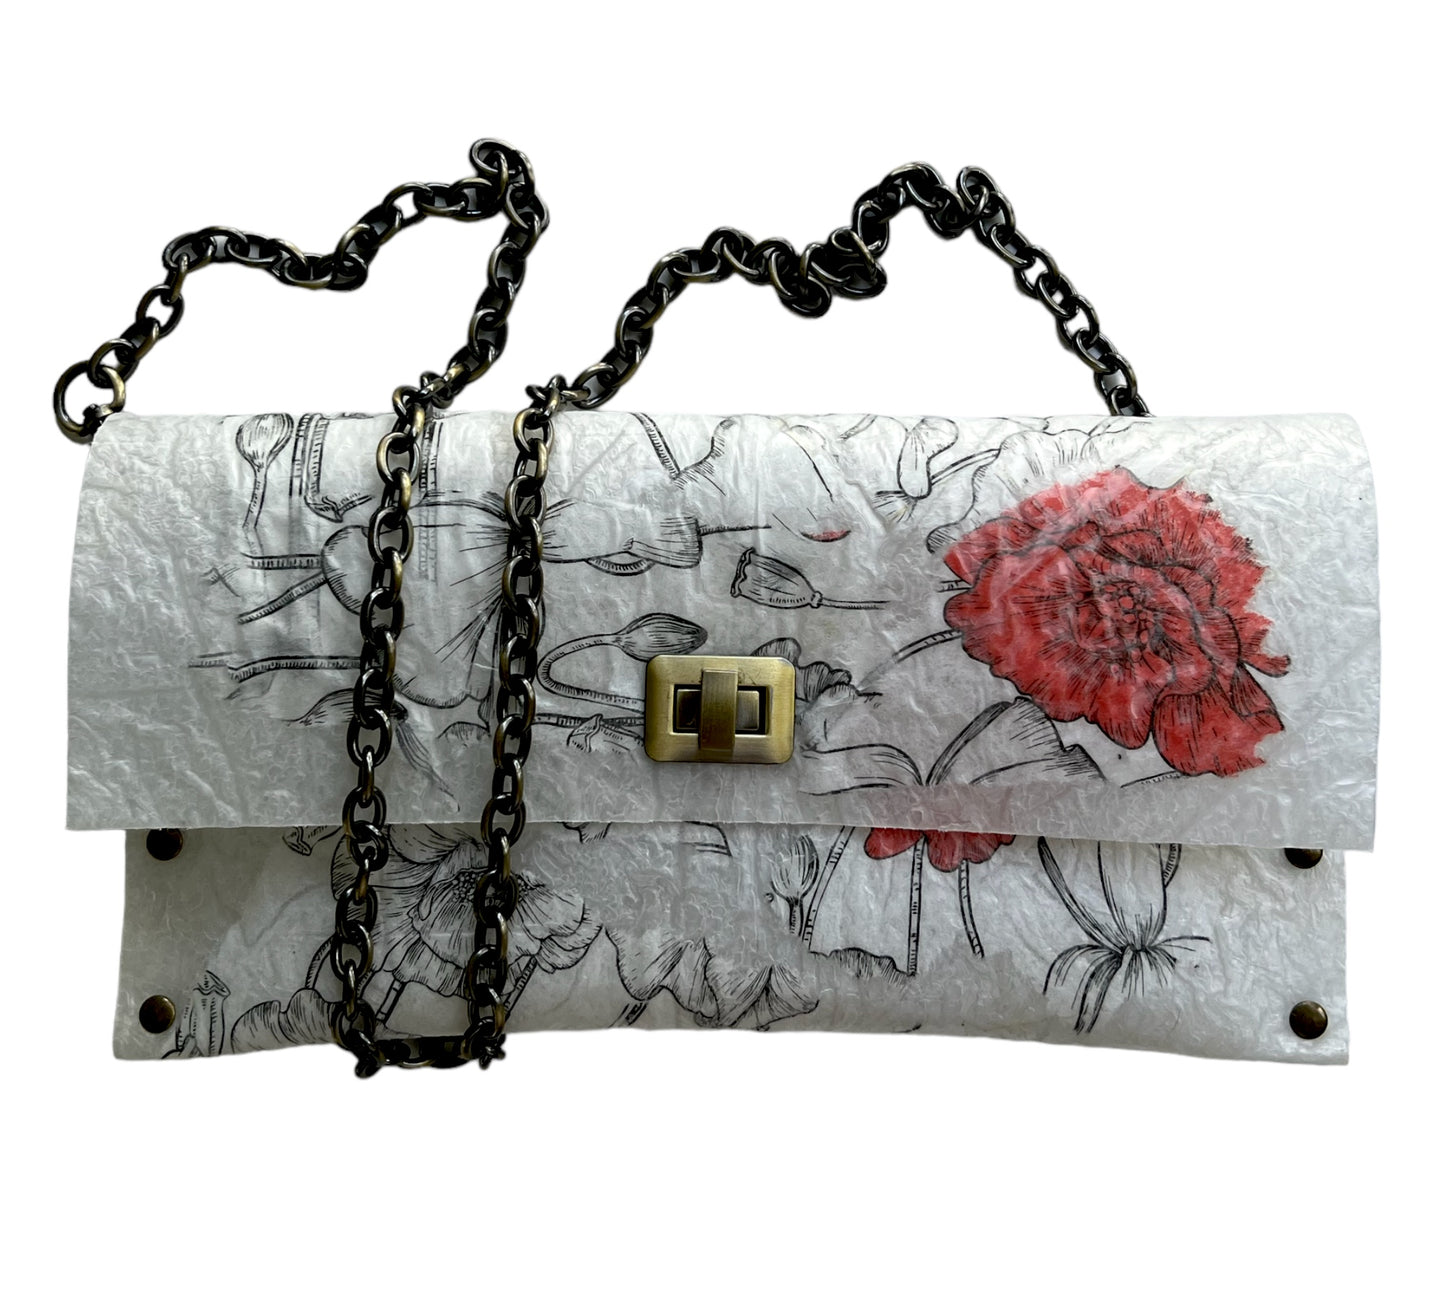 Abstract Floral Design Purse